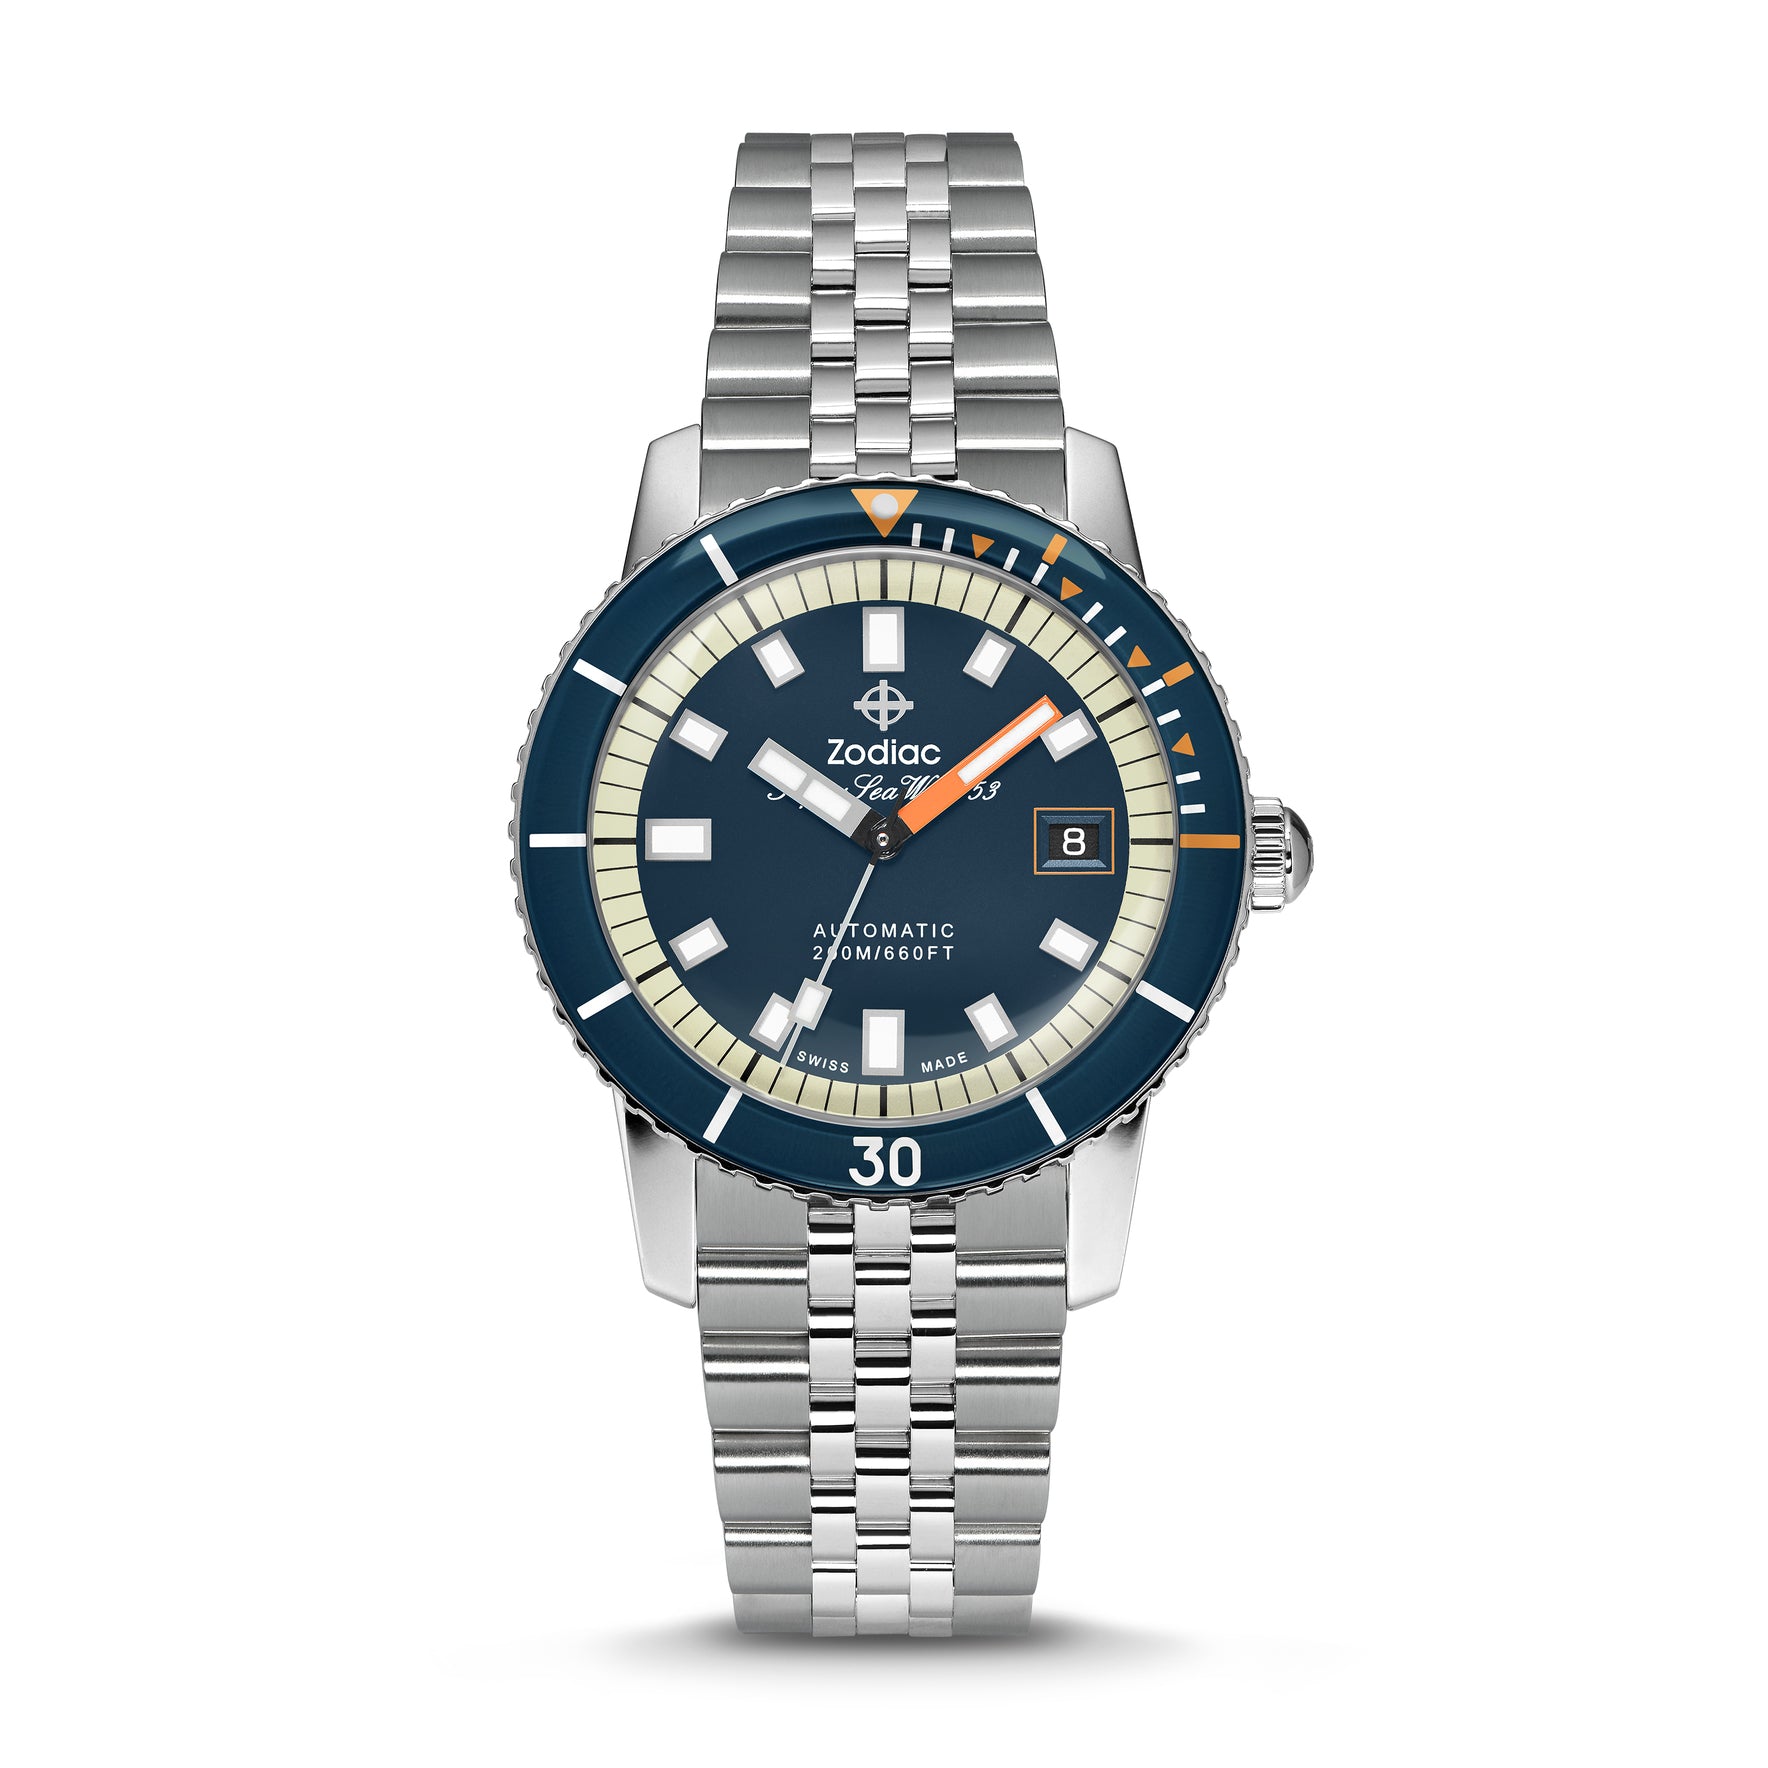 SUPER SEA WOLF COMPRESSION AUTOMATIC STAINLESS STEEL WATCH